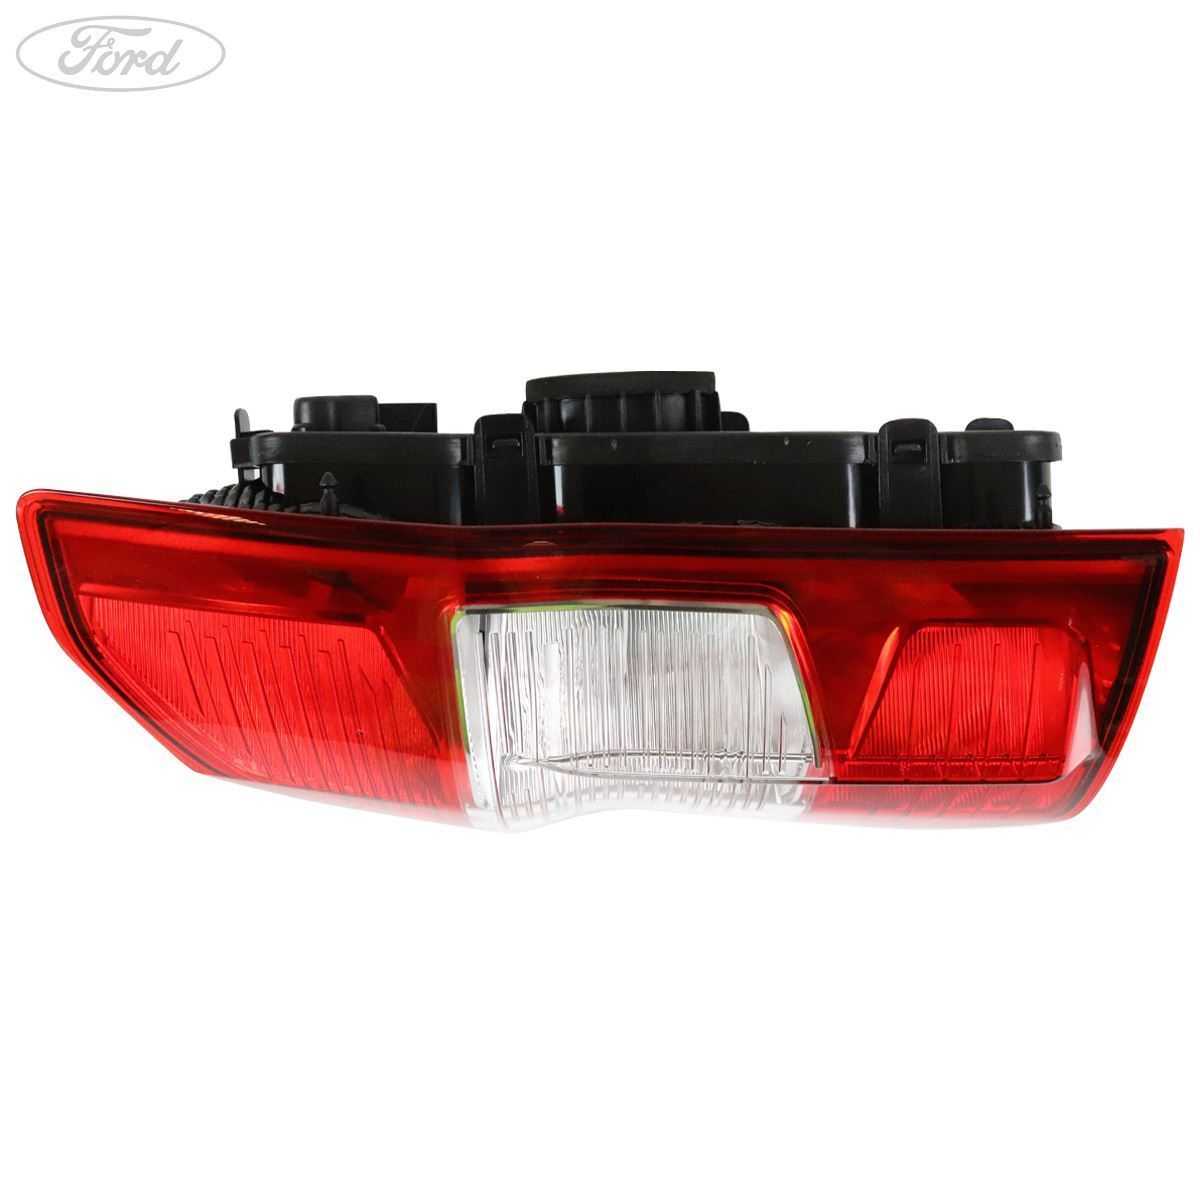 Ford, TRANSIT TOURNEO COURIER REAR DRIVER SIDE LIGHT LAMP UNIT 2014-